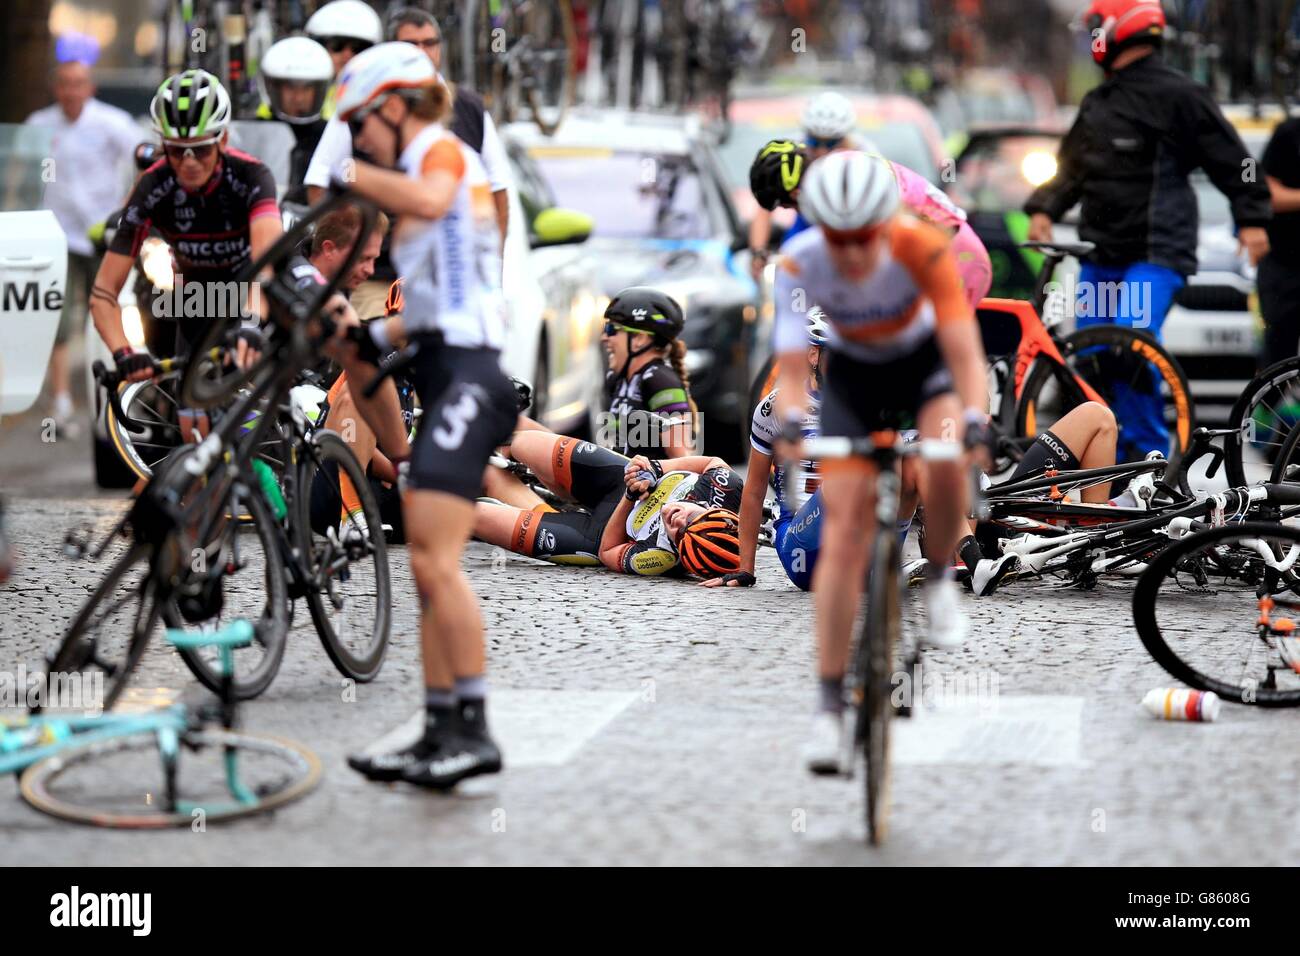 Riders crash during the Women's La Course by Le Tour one-day race event at Paris Champs-Elysees, France. Stock Photo